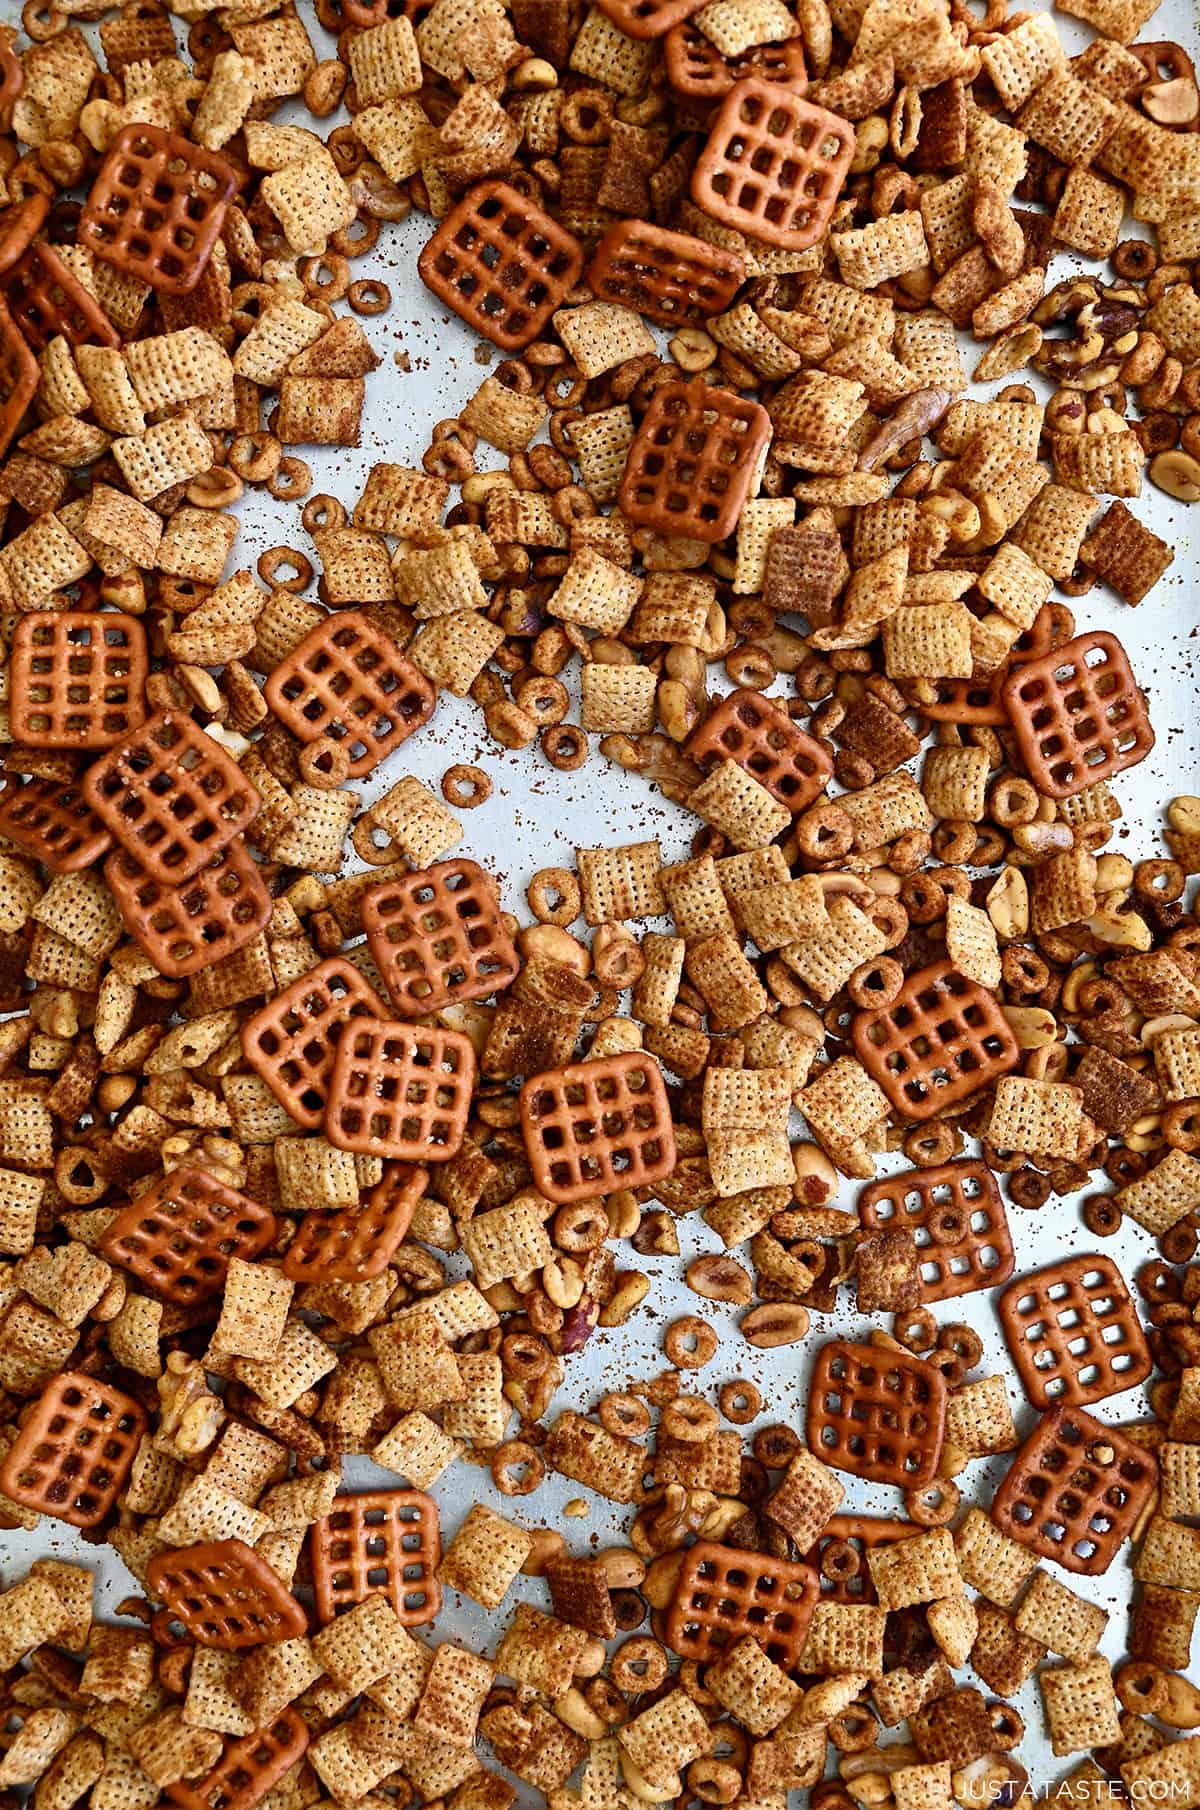 Homemade Chex Mix with pretzels, peanuts, halved walnuts and Cheerios on a metal baking sheet.